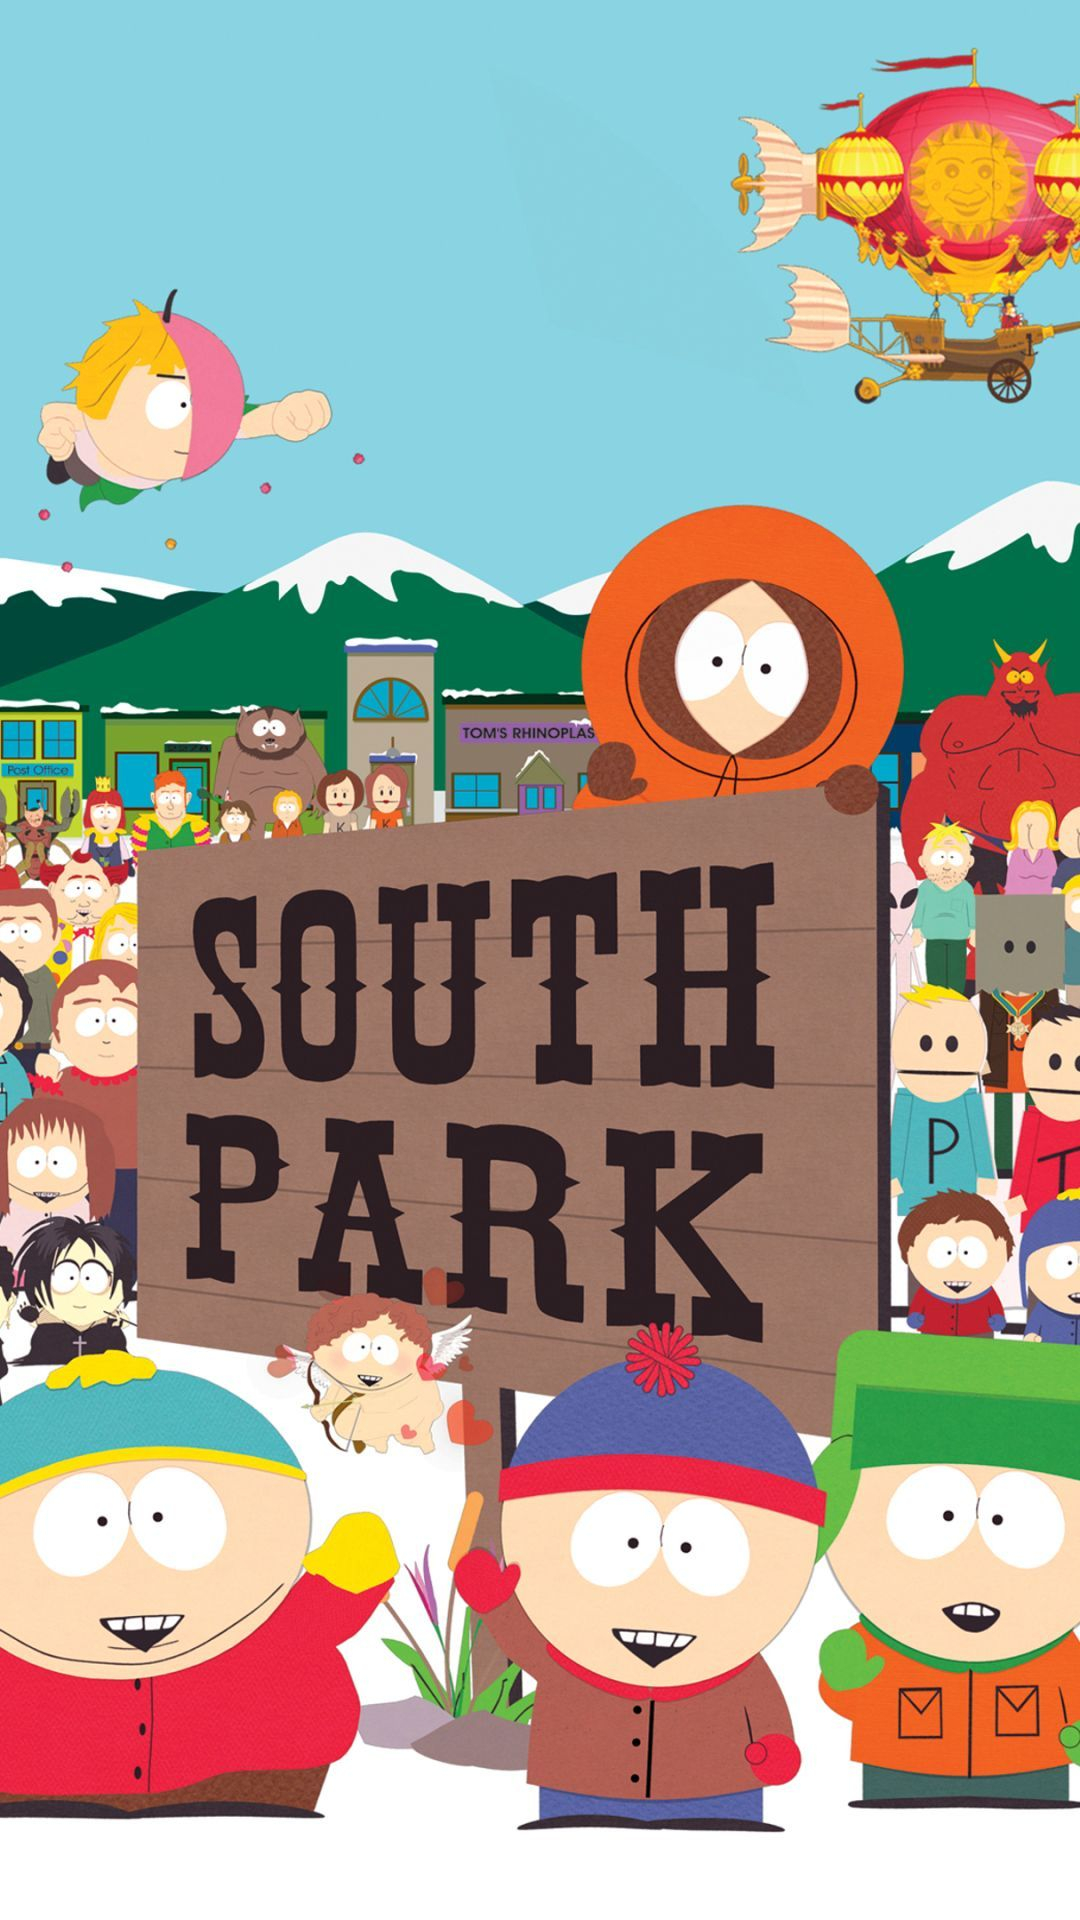 1080x1920 South Park Aesthetic Wallpapers Top Free South Park Aesthetic Backgrounds